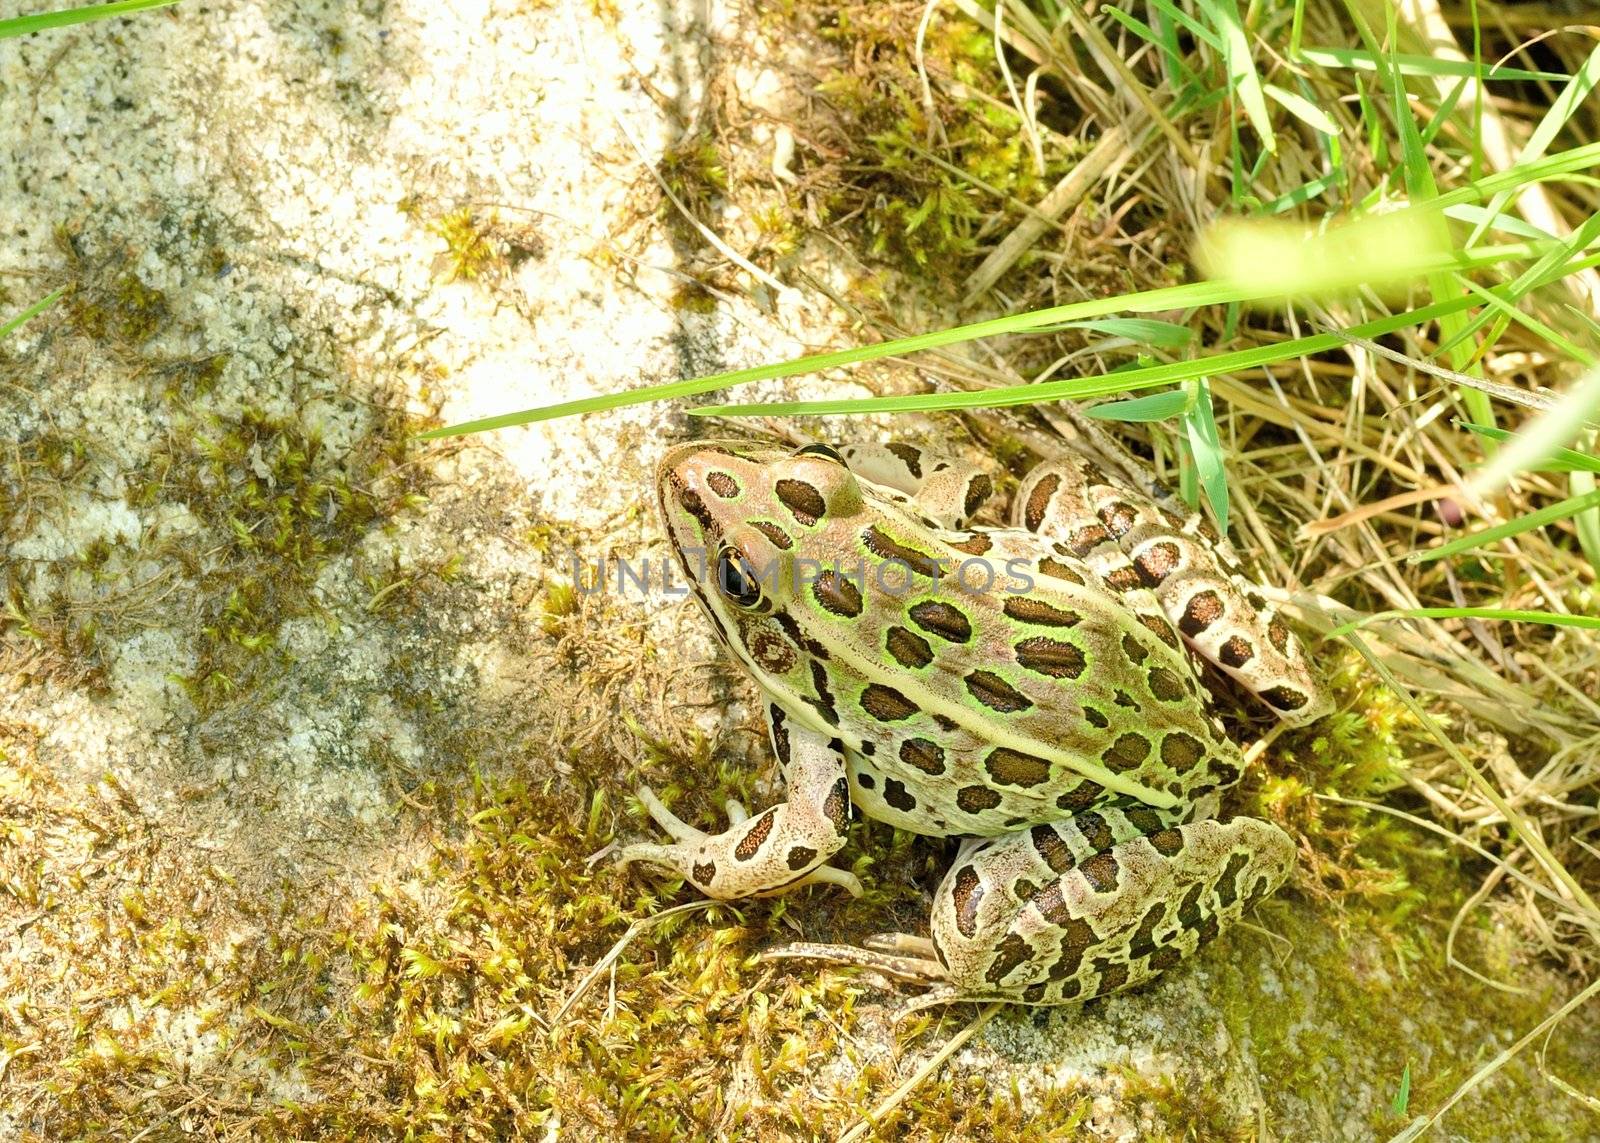 Northern Leopard Frog perched on a rock.